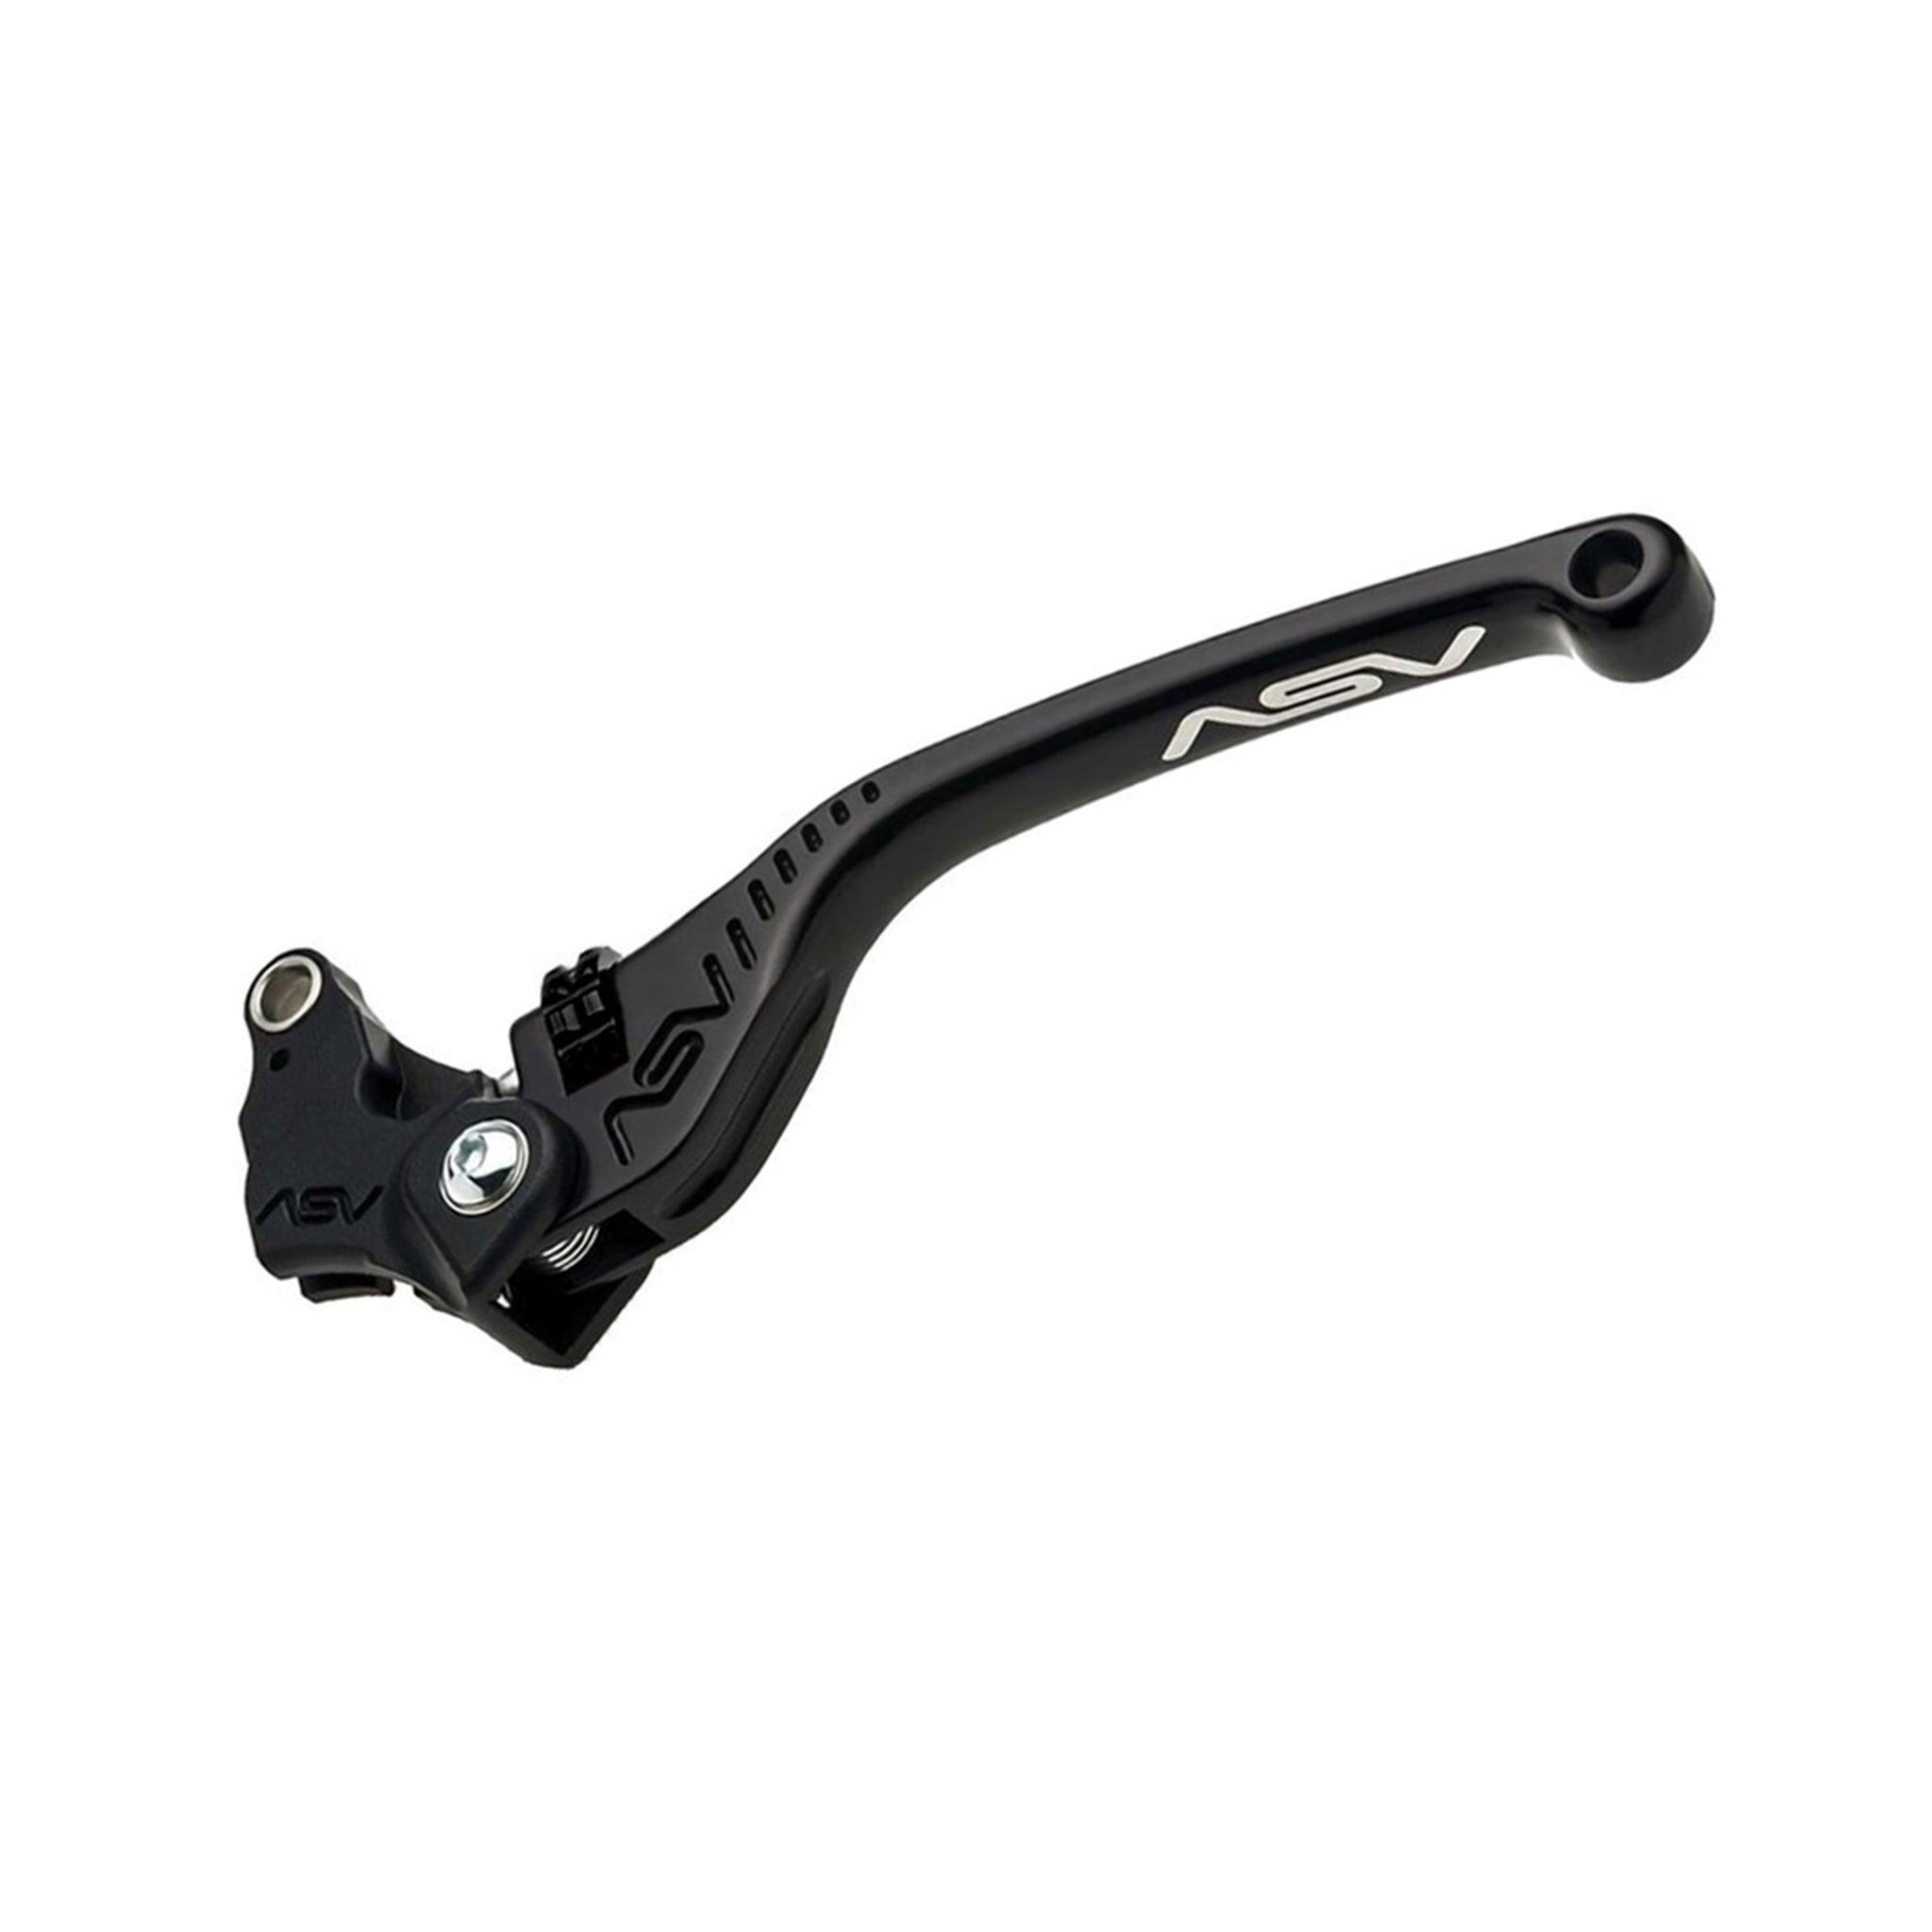 Top Notch ASV F3 Unbreakable Brake Lever for Triumph Motorcycles 